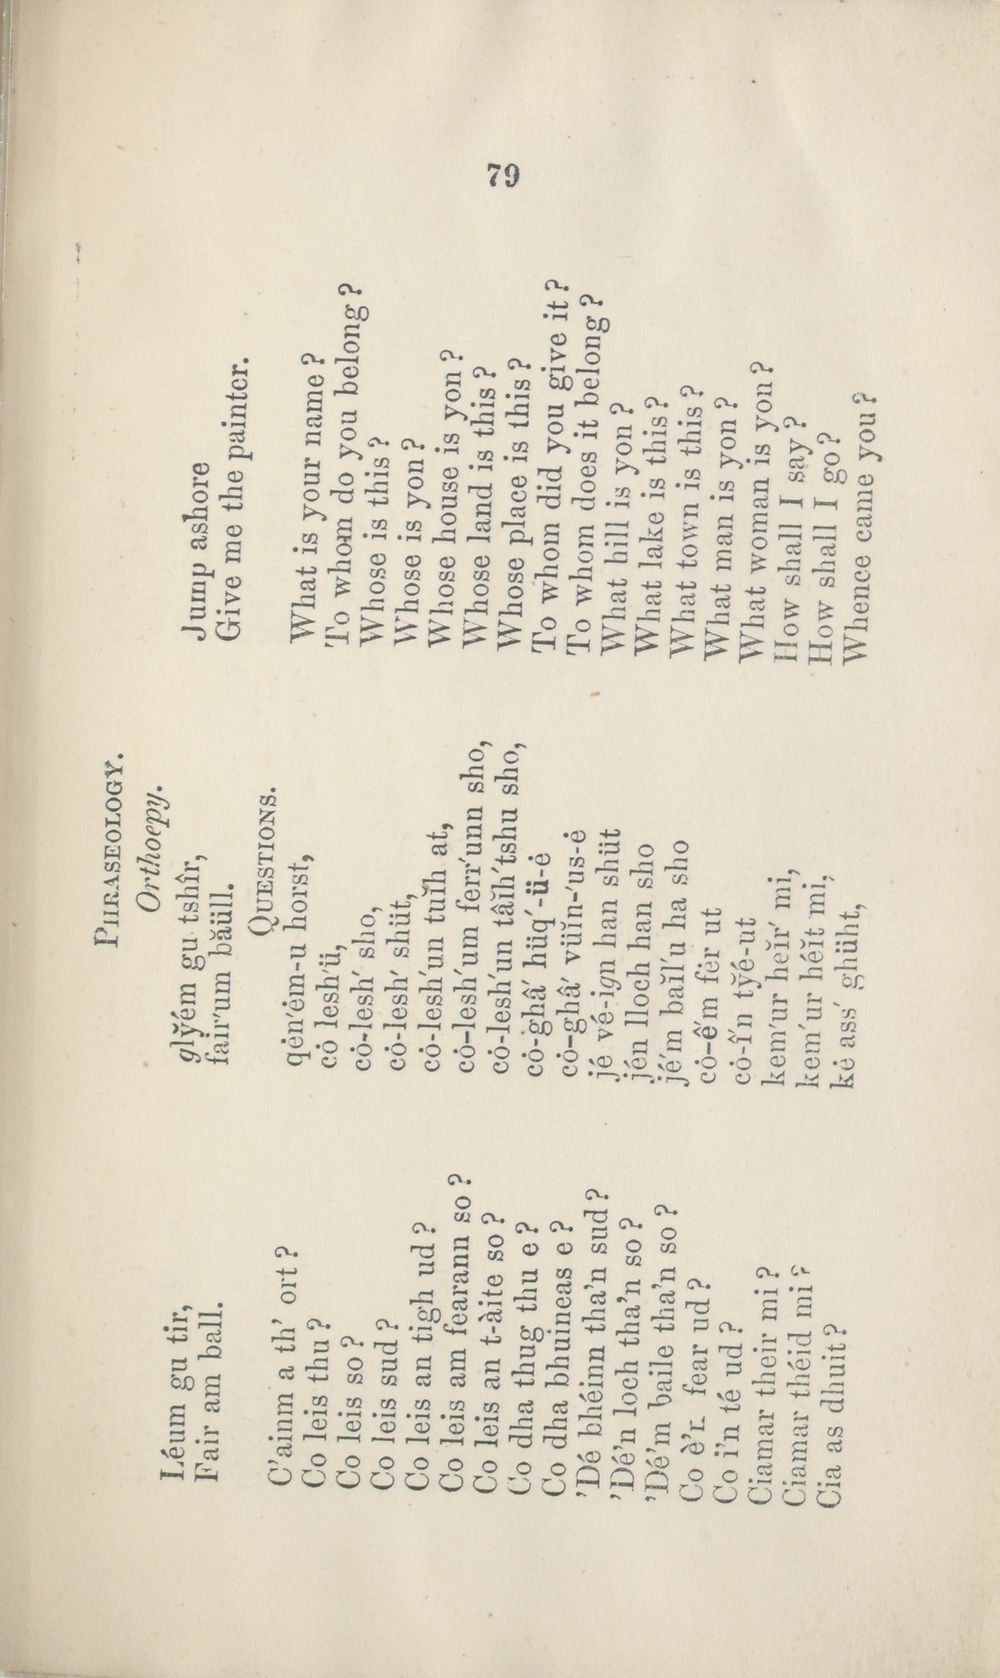 Page 79 Books And Other Items Printed In Gaelic From 1871 To 1900 New Gaelic Primer Containing Elements Of Pronunciation An Abridged Grammar Formation Of Words A List